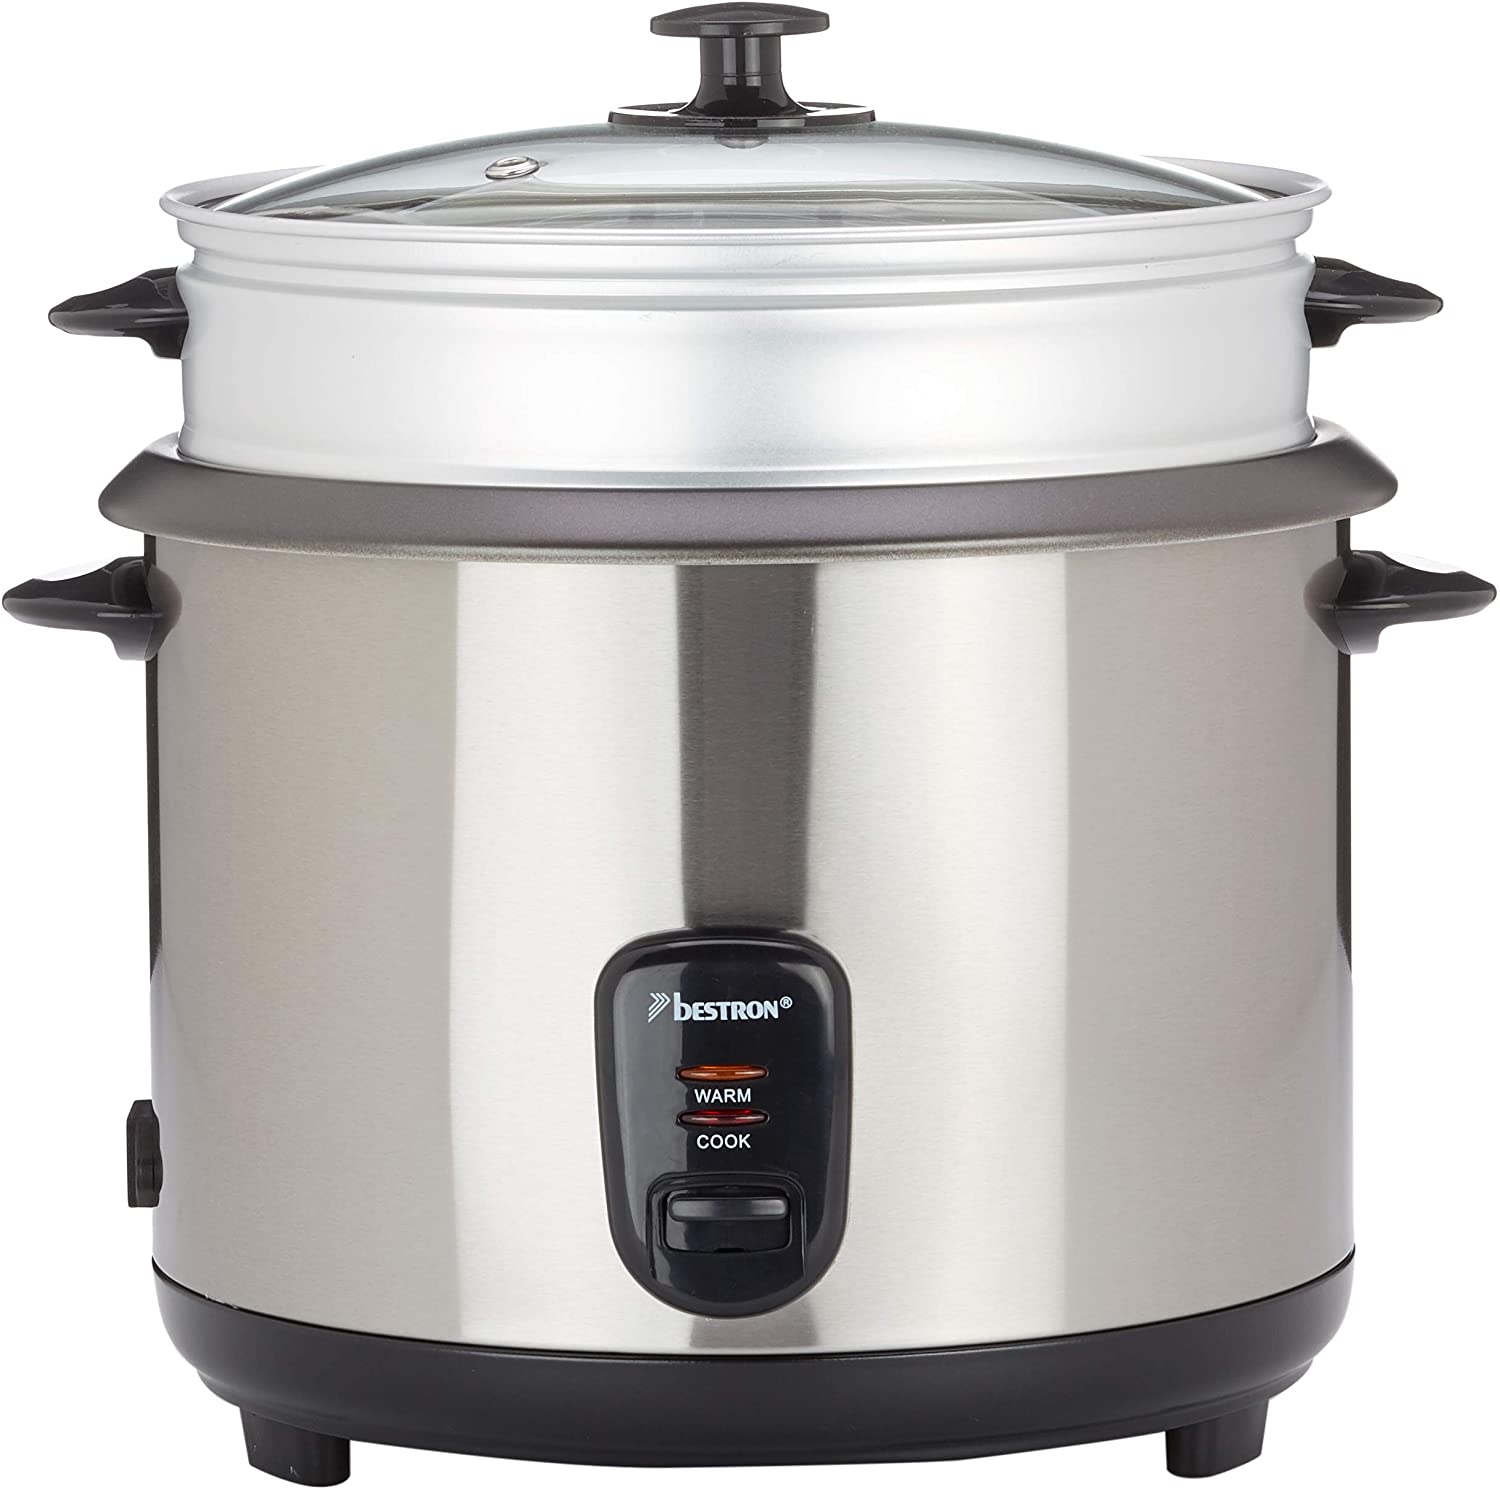 Bestron Large Rice Cooker for 12-15 People, Includes Steamer Attachment, Measuring Cup & Rice Spoon, with Non-Stick Coating and Indicator Light, Dishwasher Safe, 2.8 Litres, 1000 W, Colour: Silver